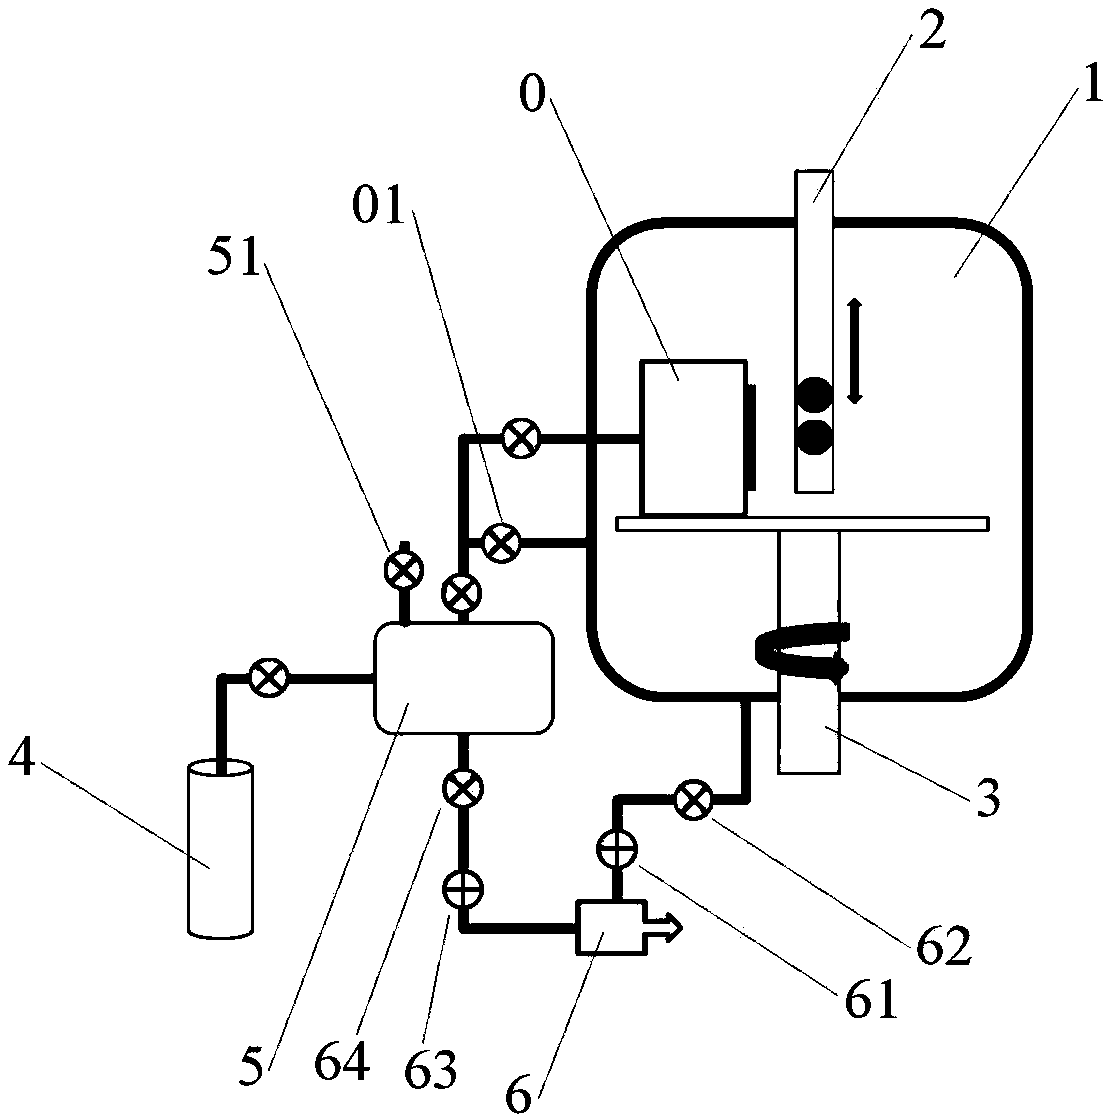 Control system for charged particle detection spectrometer of white light neutron source